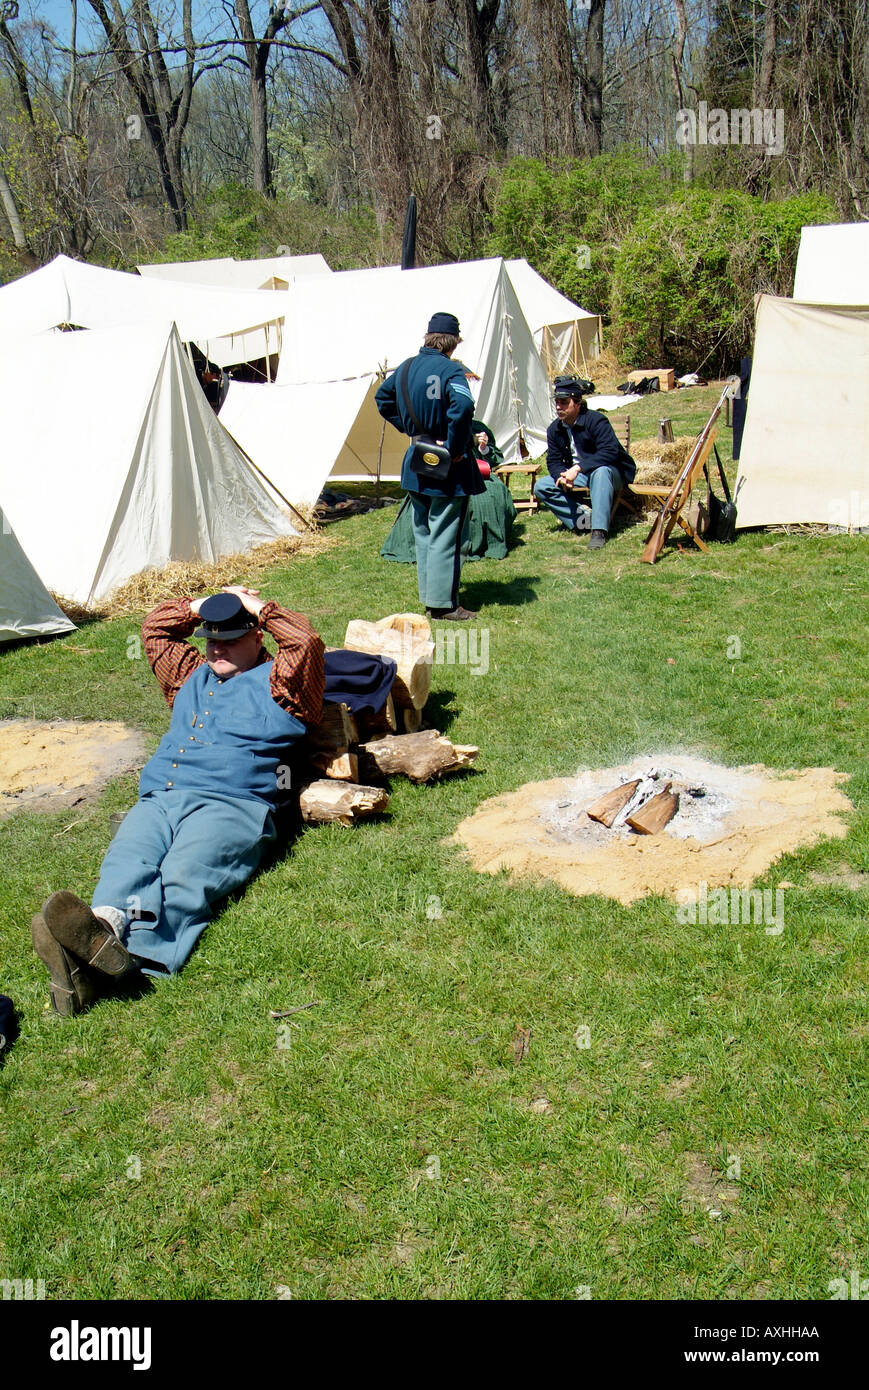 Some members of the 7th regiment of Md Volunteer infantry resting during the 1862 Civil War at a reenactment in Glendale Md Stock Photo